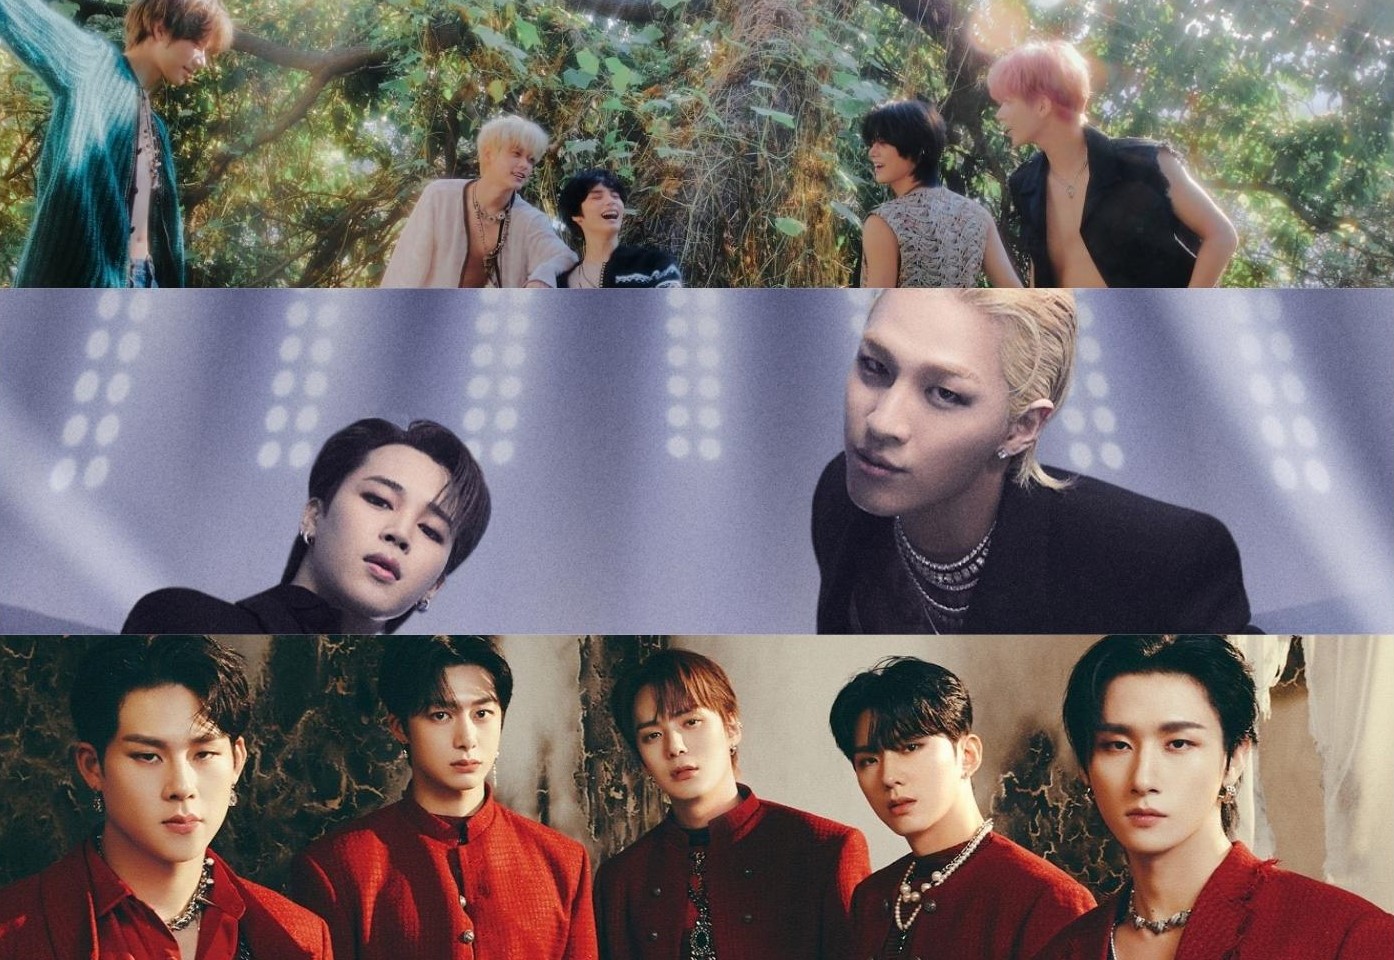 Top 7 K-pop Boys Group songs for January 2023: “Sugar Rush Ride”, “VIBE” and more!